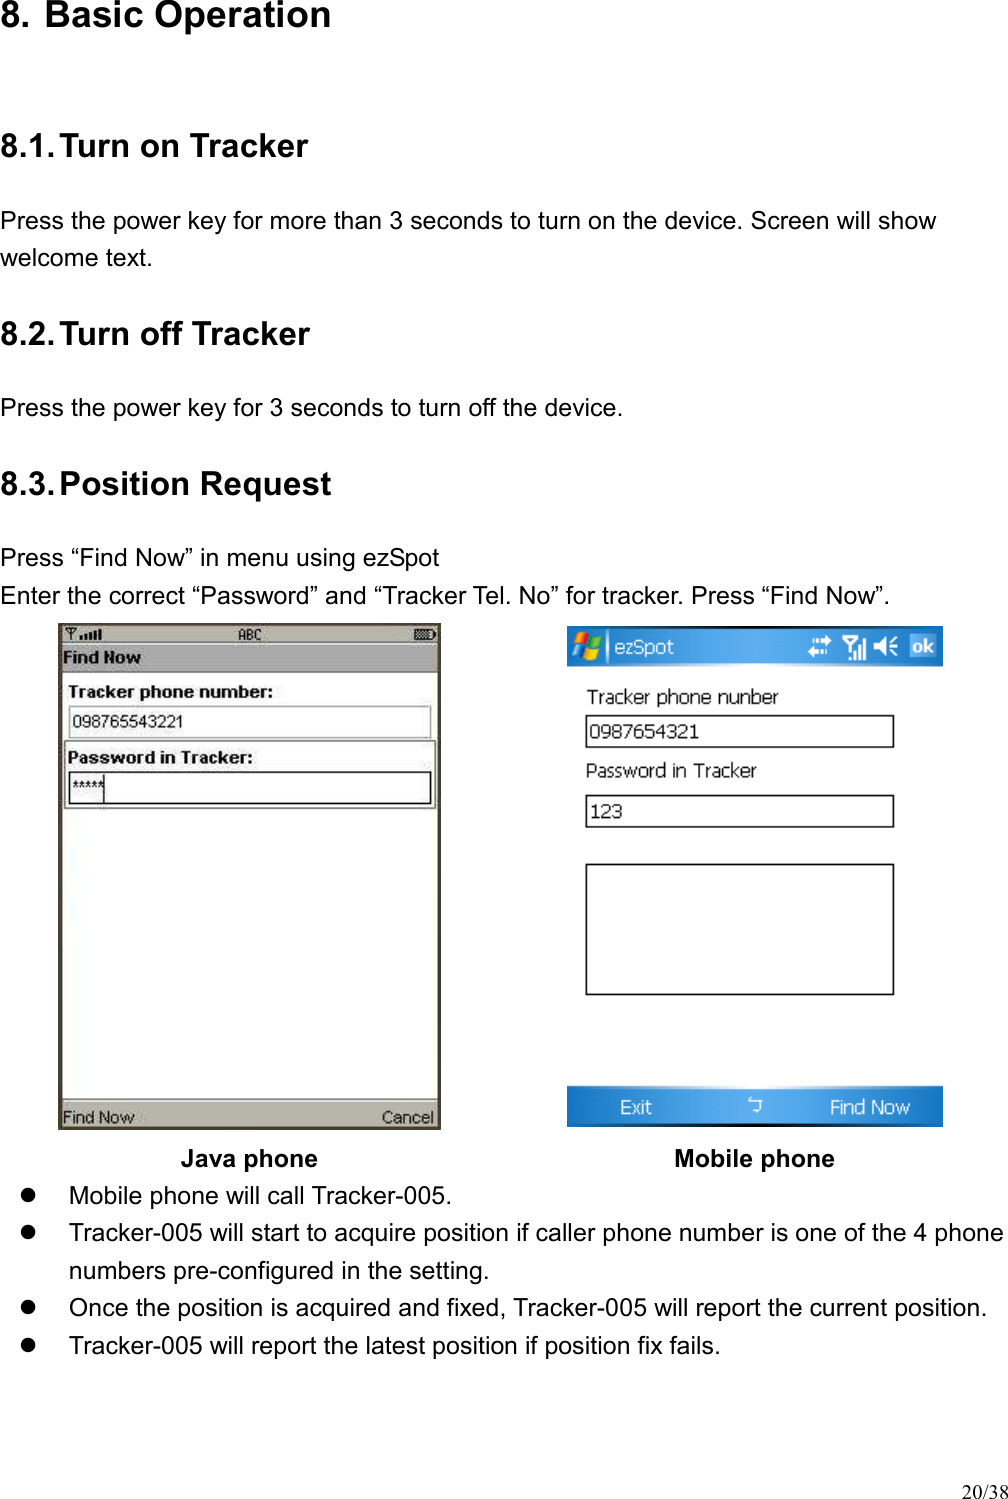 20/38 8. Basic Operation 8.1. Turn on Tracker Press the power key for more than 3 seconds to turn on the device. Screen will show welcome text. 8.2. Turn off Tracker Press the power key for 3 seconds to turn off the device. 8.3. Position Request Press “Find Now” in menu using ezSpot   Enter the correct “Password” and “Tracker Tel. No” for tracker. Press “Find Now”.   Java phone  Mobile phone   Mobile phone will call Tracker-005.   Tracker-005 will start to acquire position if caller phone number is one of the 4 phone numbers pre-configured in the setting.   Once the position is acquired and fixed, Tracker-005 will report the current position.     Tracker-005 will report the latest position if position fix fails. 